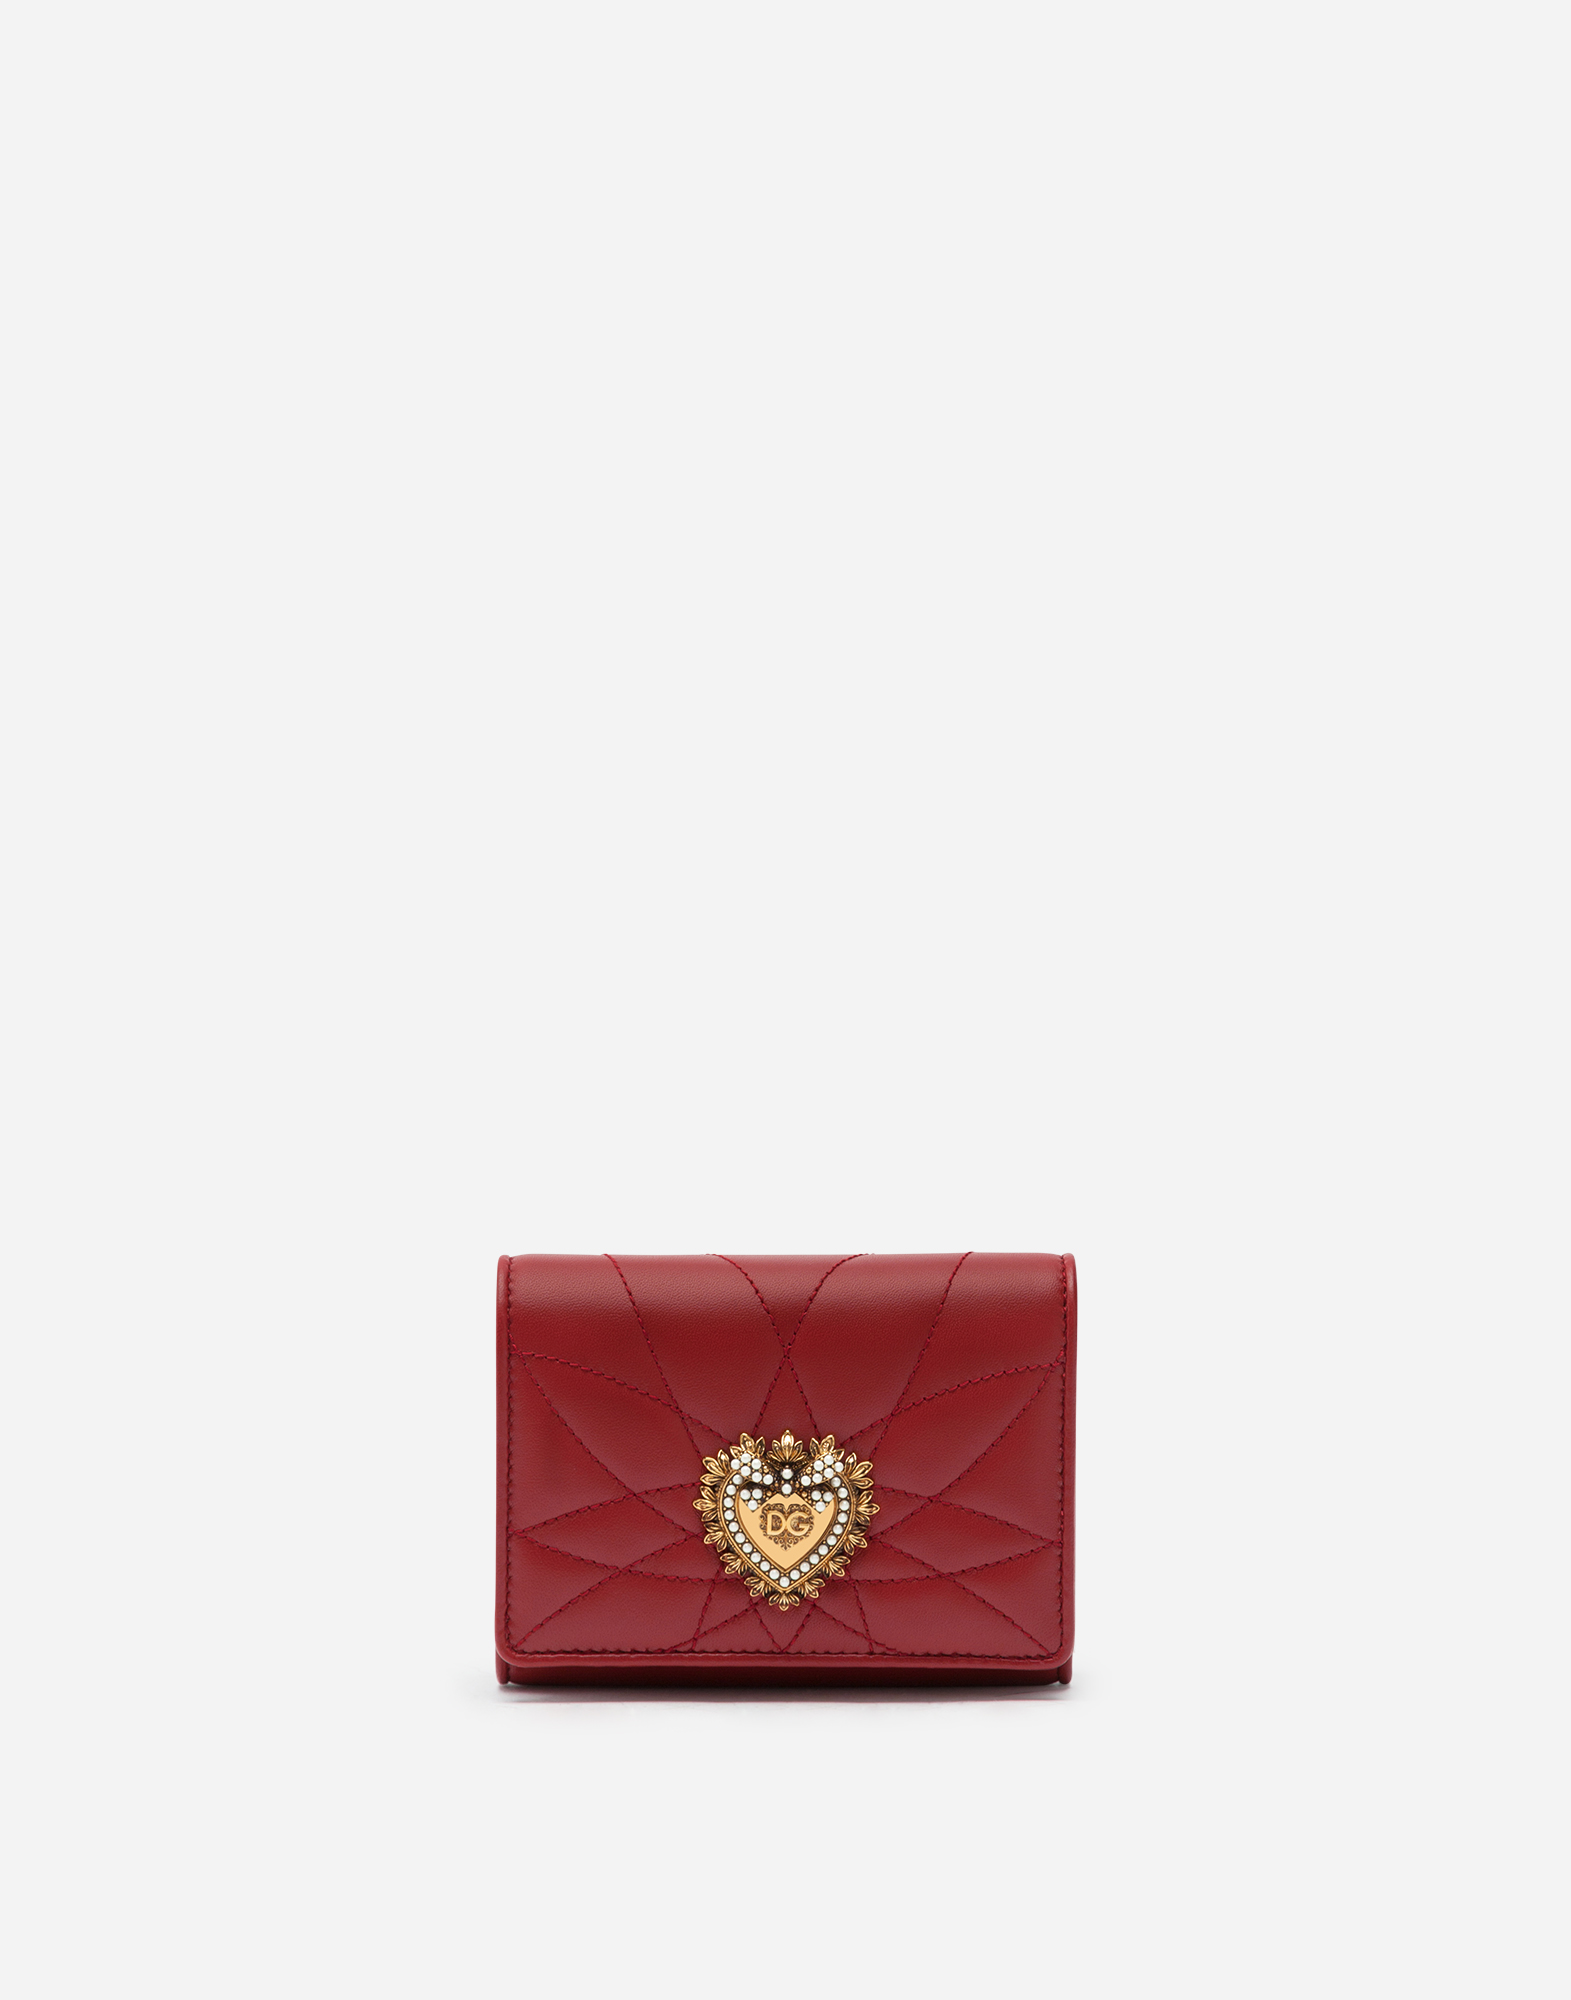 SMALL LEATHER GOODS  in Red